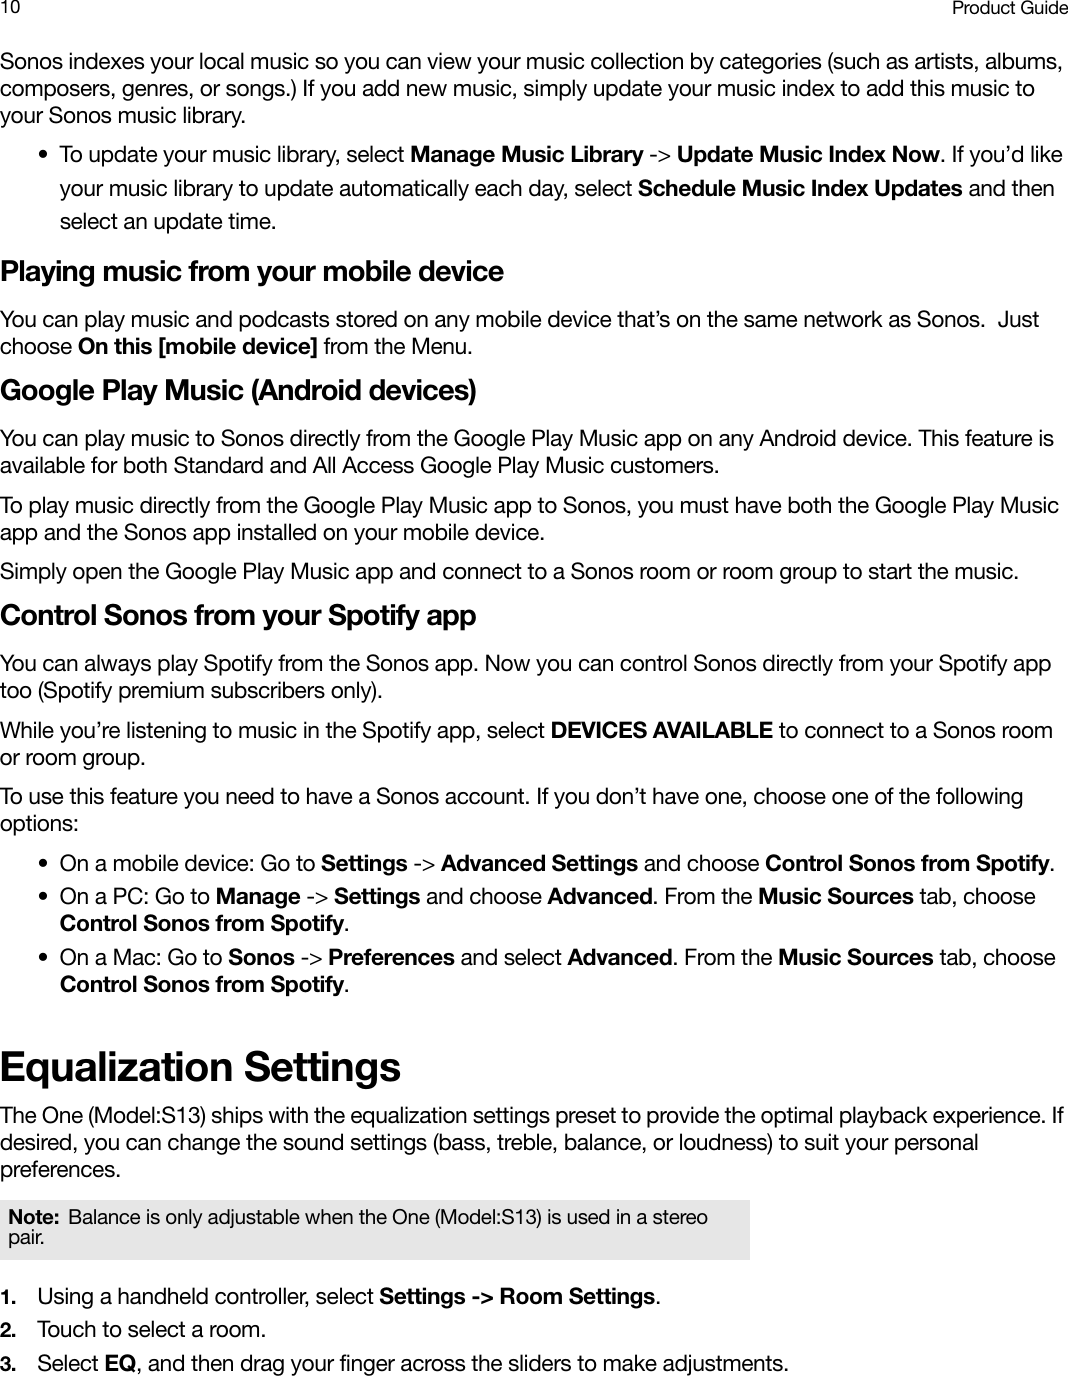 Product Guide10Sonos indexes your local music so you can view your music collection by categories (such as artists, albums, composers, genres, or songs.) If you add new music, simply update your music index to add this music to your Sonos music library.• To update your music library, select Manage Music Library -&gt; Update Music Index Now. If you’d like your music library to update automatically each day, select Schedule Music Index Updates and then select an update time.Playing music from your mobile deviceYou can play music and podcasts stored on any mobile device that’s on the same network as Sonos.  Just choose On this [mobile device] from the Menu.Google Play Music (Android devices)You can play music to Sonos directly from the Google Play Music app on any Android device. This feature is available for both Standard and All Access Google Play Music customers. To play music directly from the Google Play Music app to Sonos, you must have both the Google Play Music app and the Sonos app installed on your mobile device. Simply open the Google Play Music app and connect to a Sonos room or room group to start the music. Control Sonos from your Spotify appYou can always play Spotify from the Sonos app. Now you can control Sonos directly from your Spotify app too (Spotify premium subscribers only). While you’re listening to music in the Spotify app, select DEVICES AVAILABLE to connect to a Sonos room or room group. To use this feature you need to have a Sonos account. If you don’t have one, choose one of the following options:• On a mobile device: Go to Settings -&gt; Advanced Settings and choose Control Sonos from Spotify.•On a PC: Go to Manage -&gt; Settings and choose Advanced. From the Music Sources tab, choose Control Sonos from Spotify.• On a Mac: Go to Sonos -&gt; Preferences and select Advanced. From the Music Sources tab, choose Control Sonos from Spotify.Equalization SettingsThe One (Model:S13) ships with the equalization settings preset to provide the optimal playback experience. If desired, you can change the sound settings (bass, treble, balance, or loudness) to suit your personal preferences.1. Using a handheld controller, select Settings -&gt; Room Settings.2. Touch to select a room.3. Select EQ, and then drag your finger across the sliders to make adjustments.Note: Balance is only adjustable when the One (Model:S13) is used in a stereo pair.